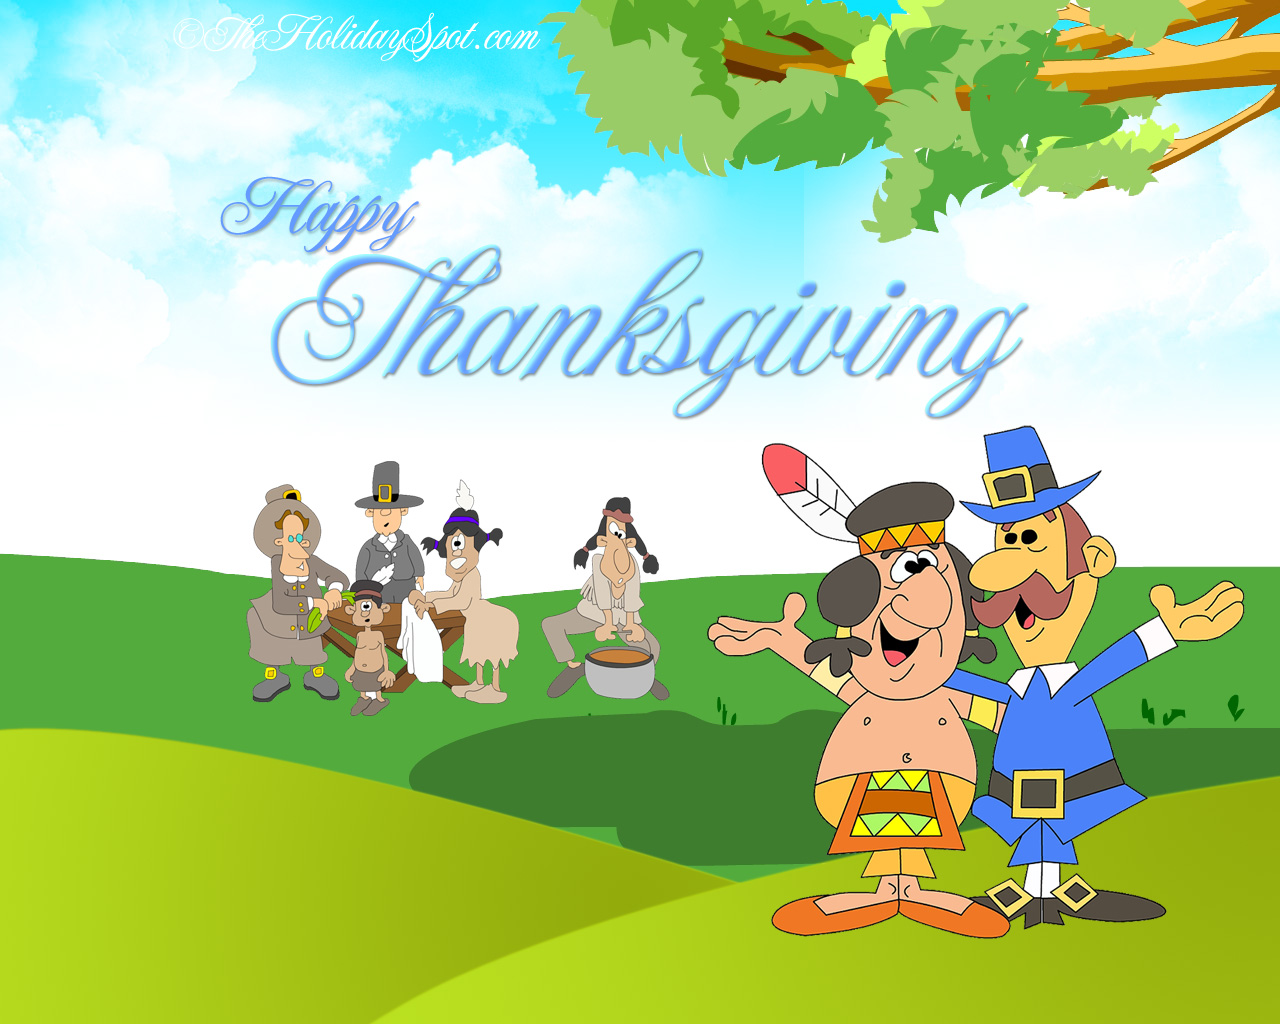 20 Thanksgiving Wallpaper and Backgrounds   ibytemedia 1280x1024